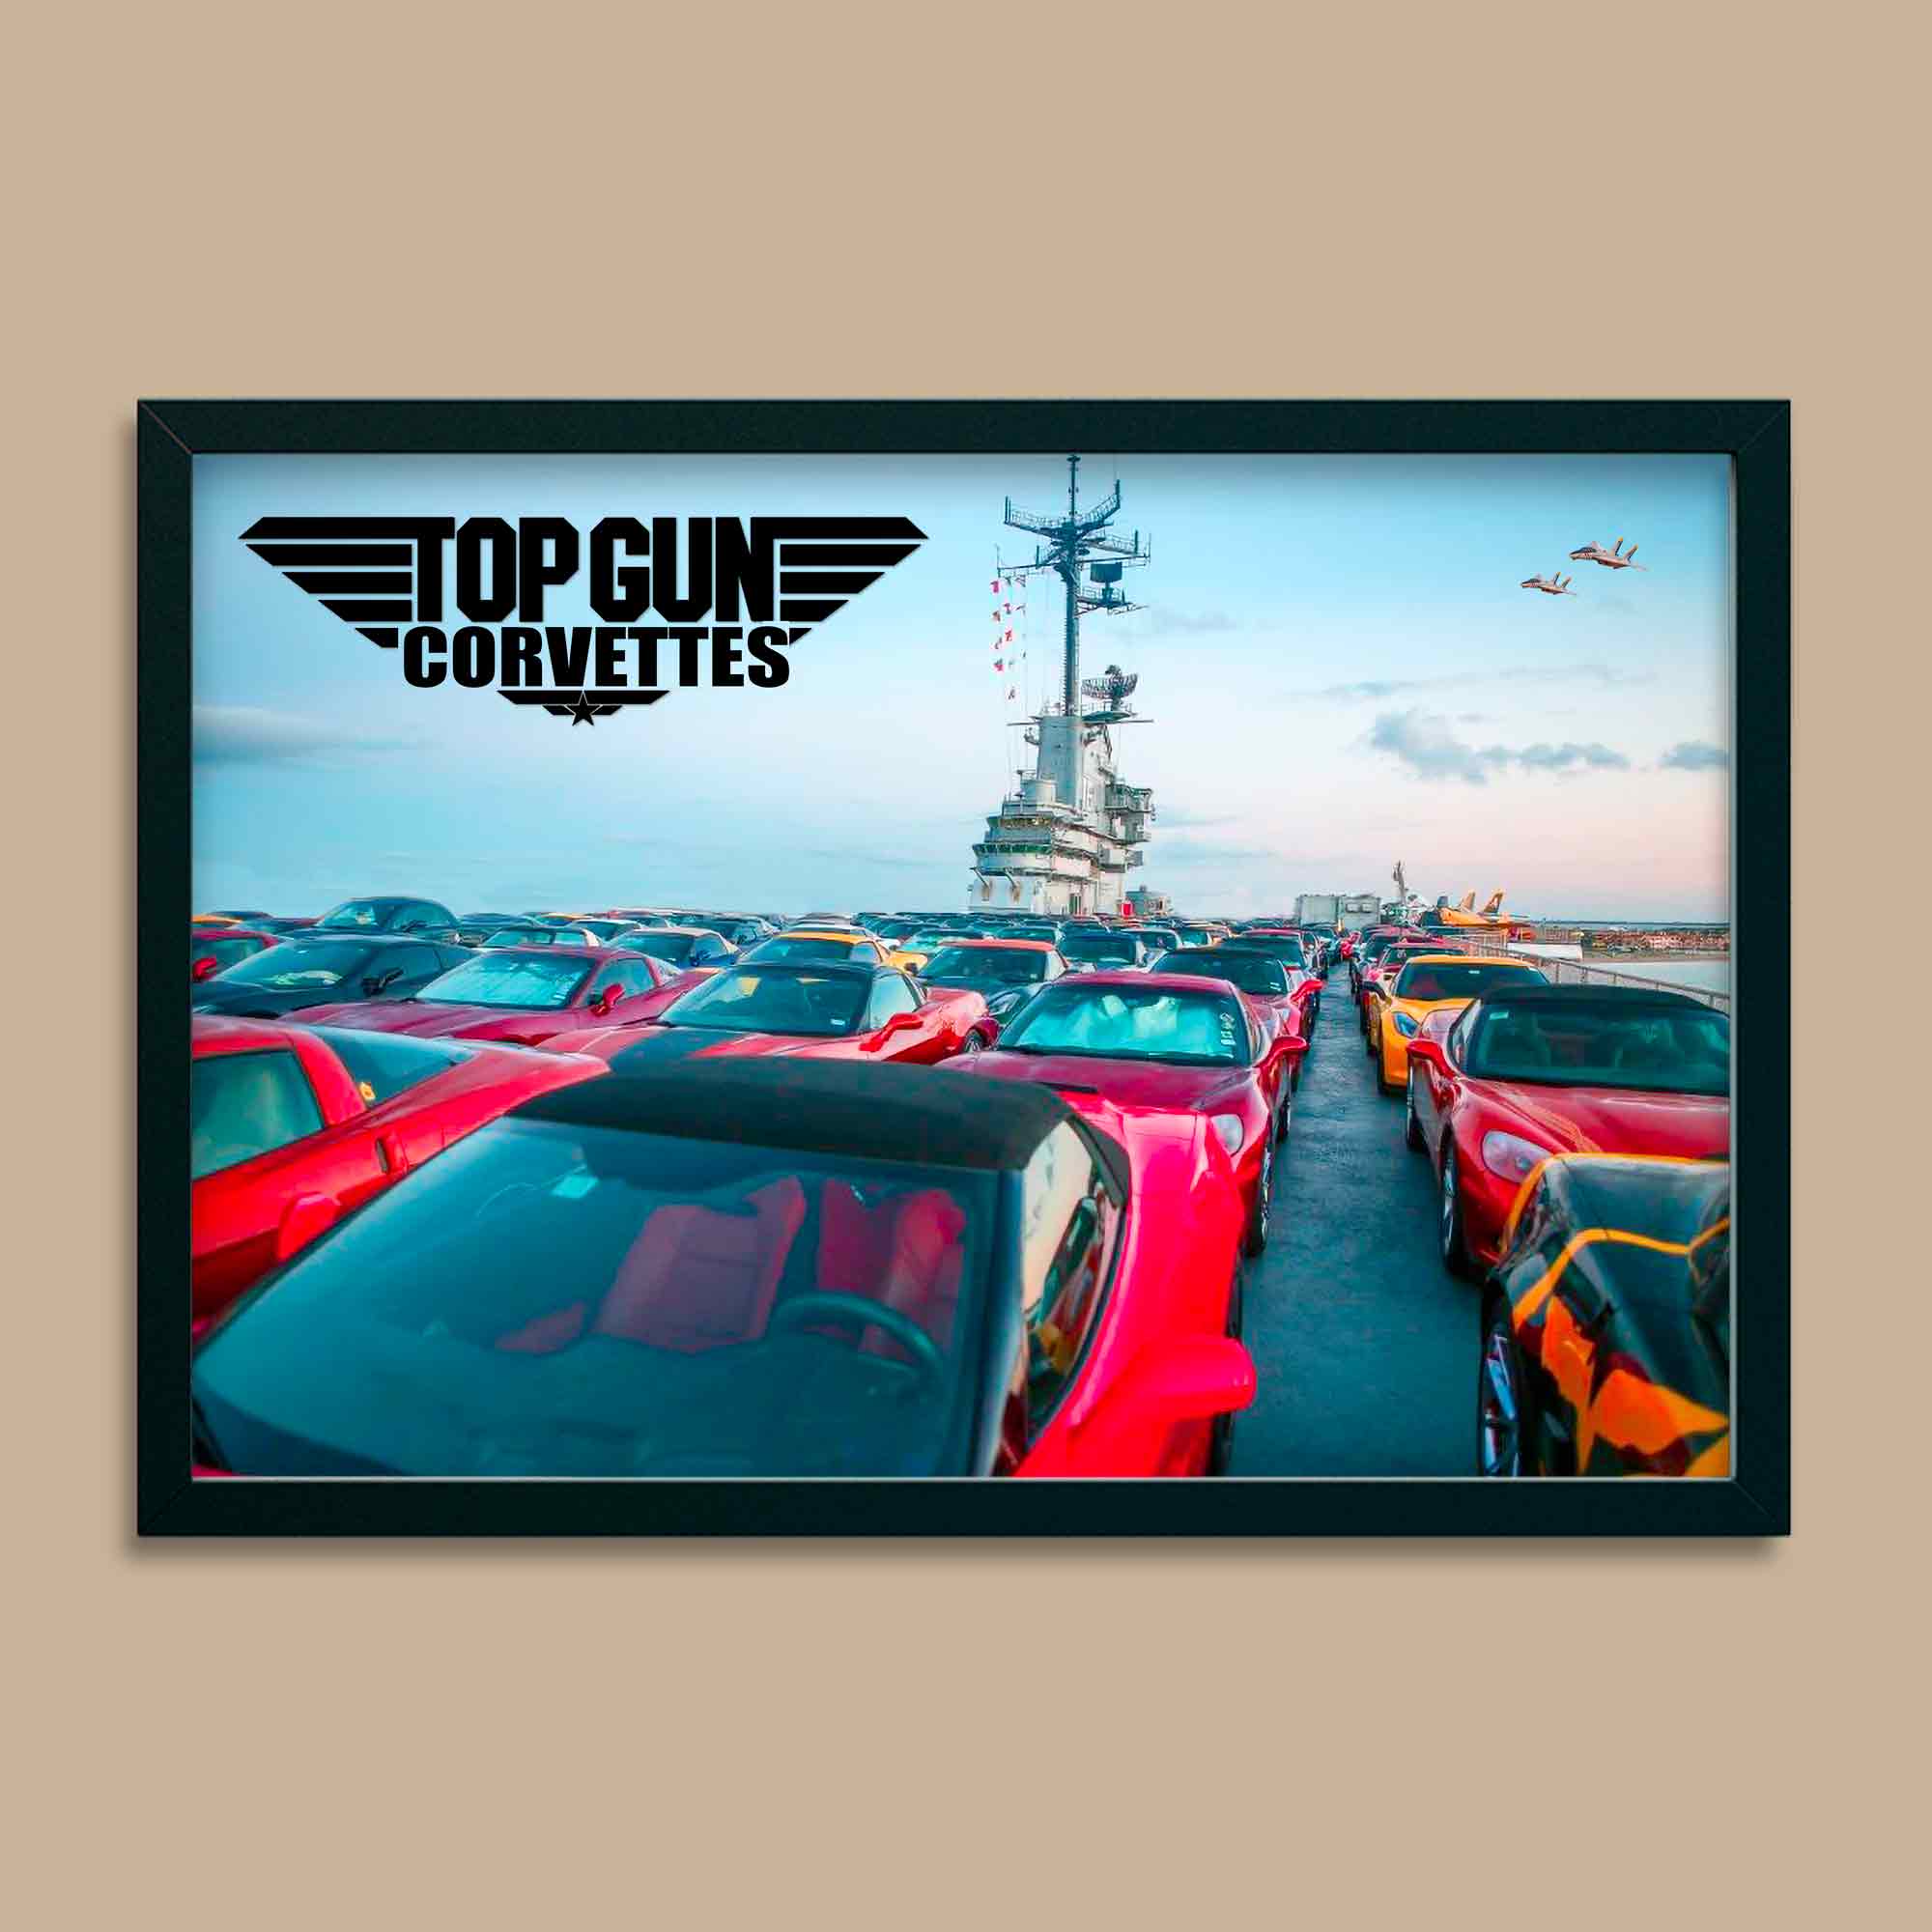 400 Corvettes on the USS Lexington - They got a need, a need for speed! - Vette1 - Wall Art